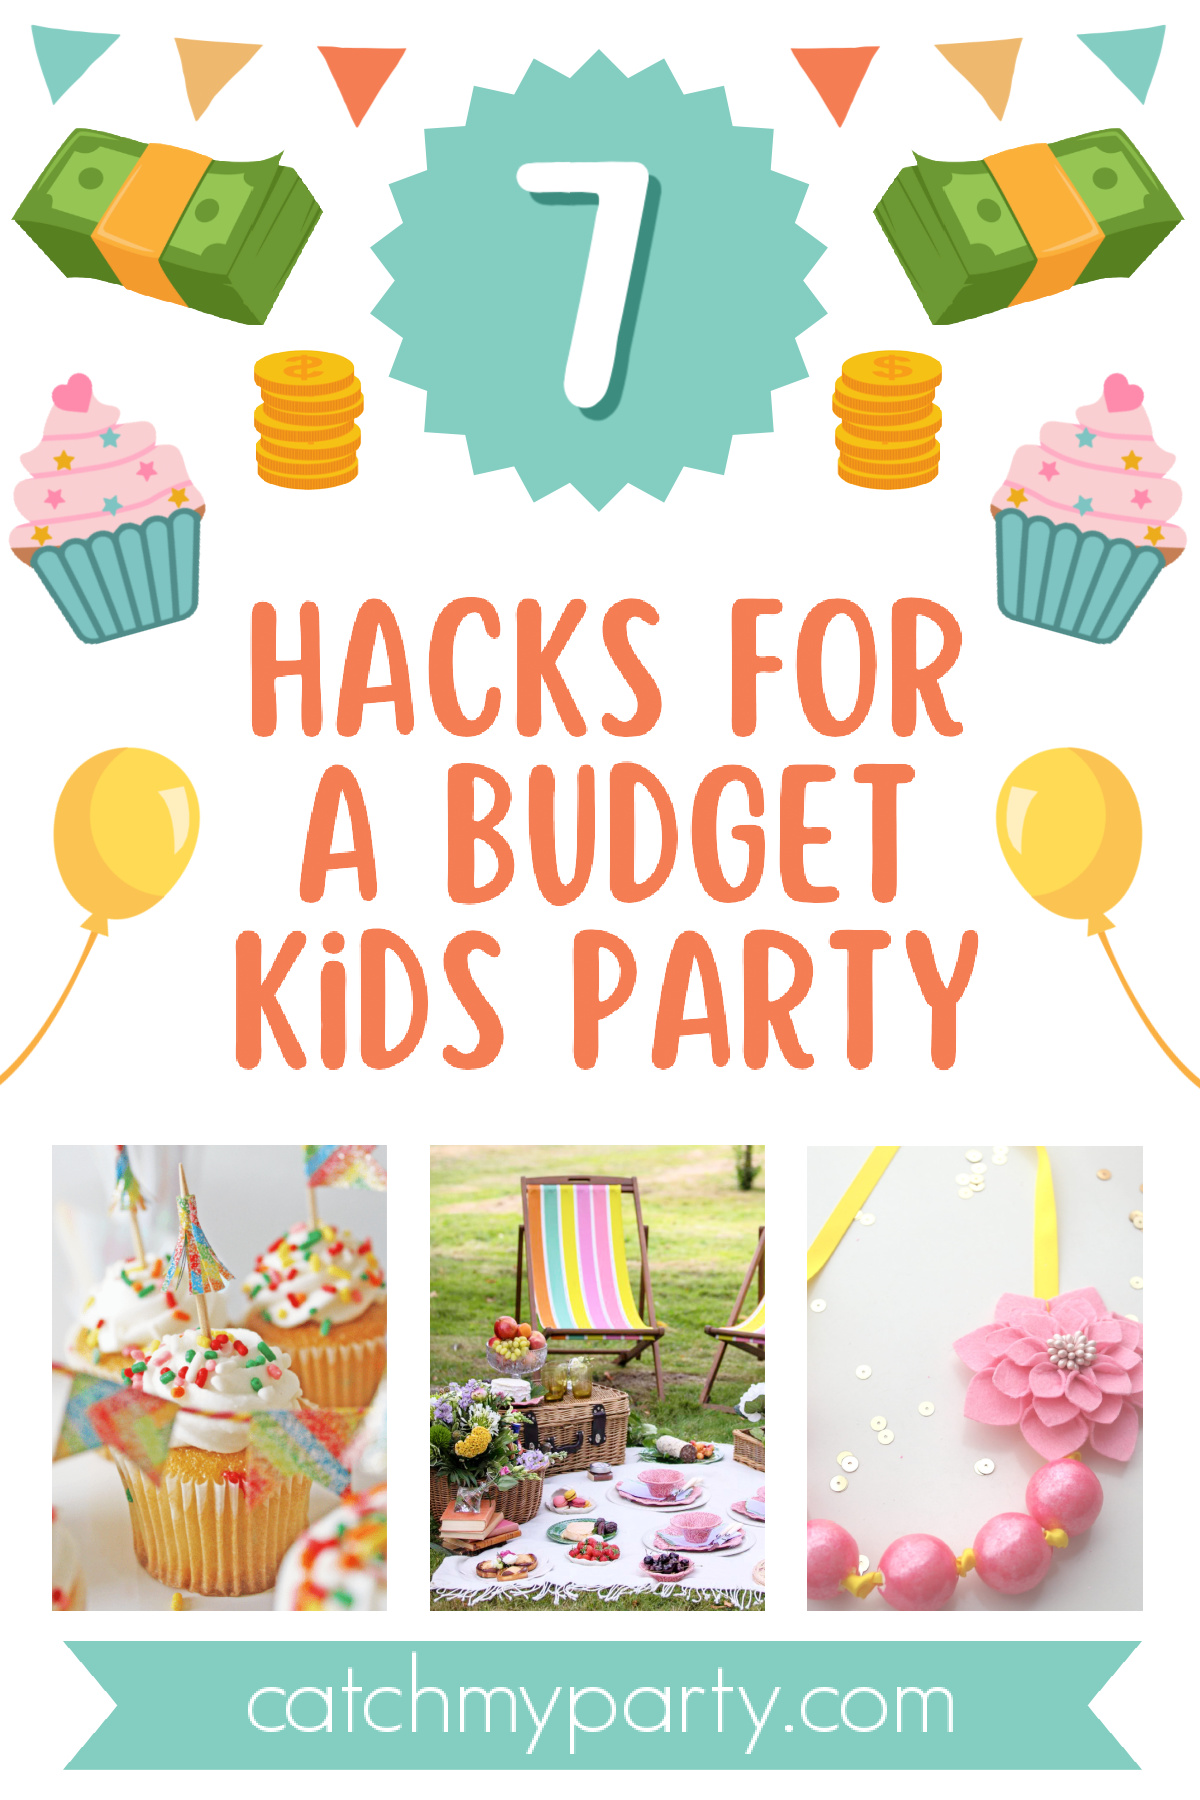 7 Hacks for Throwing a Budget Kids Birthday Party